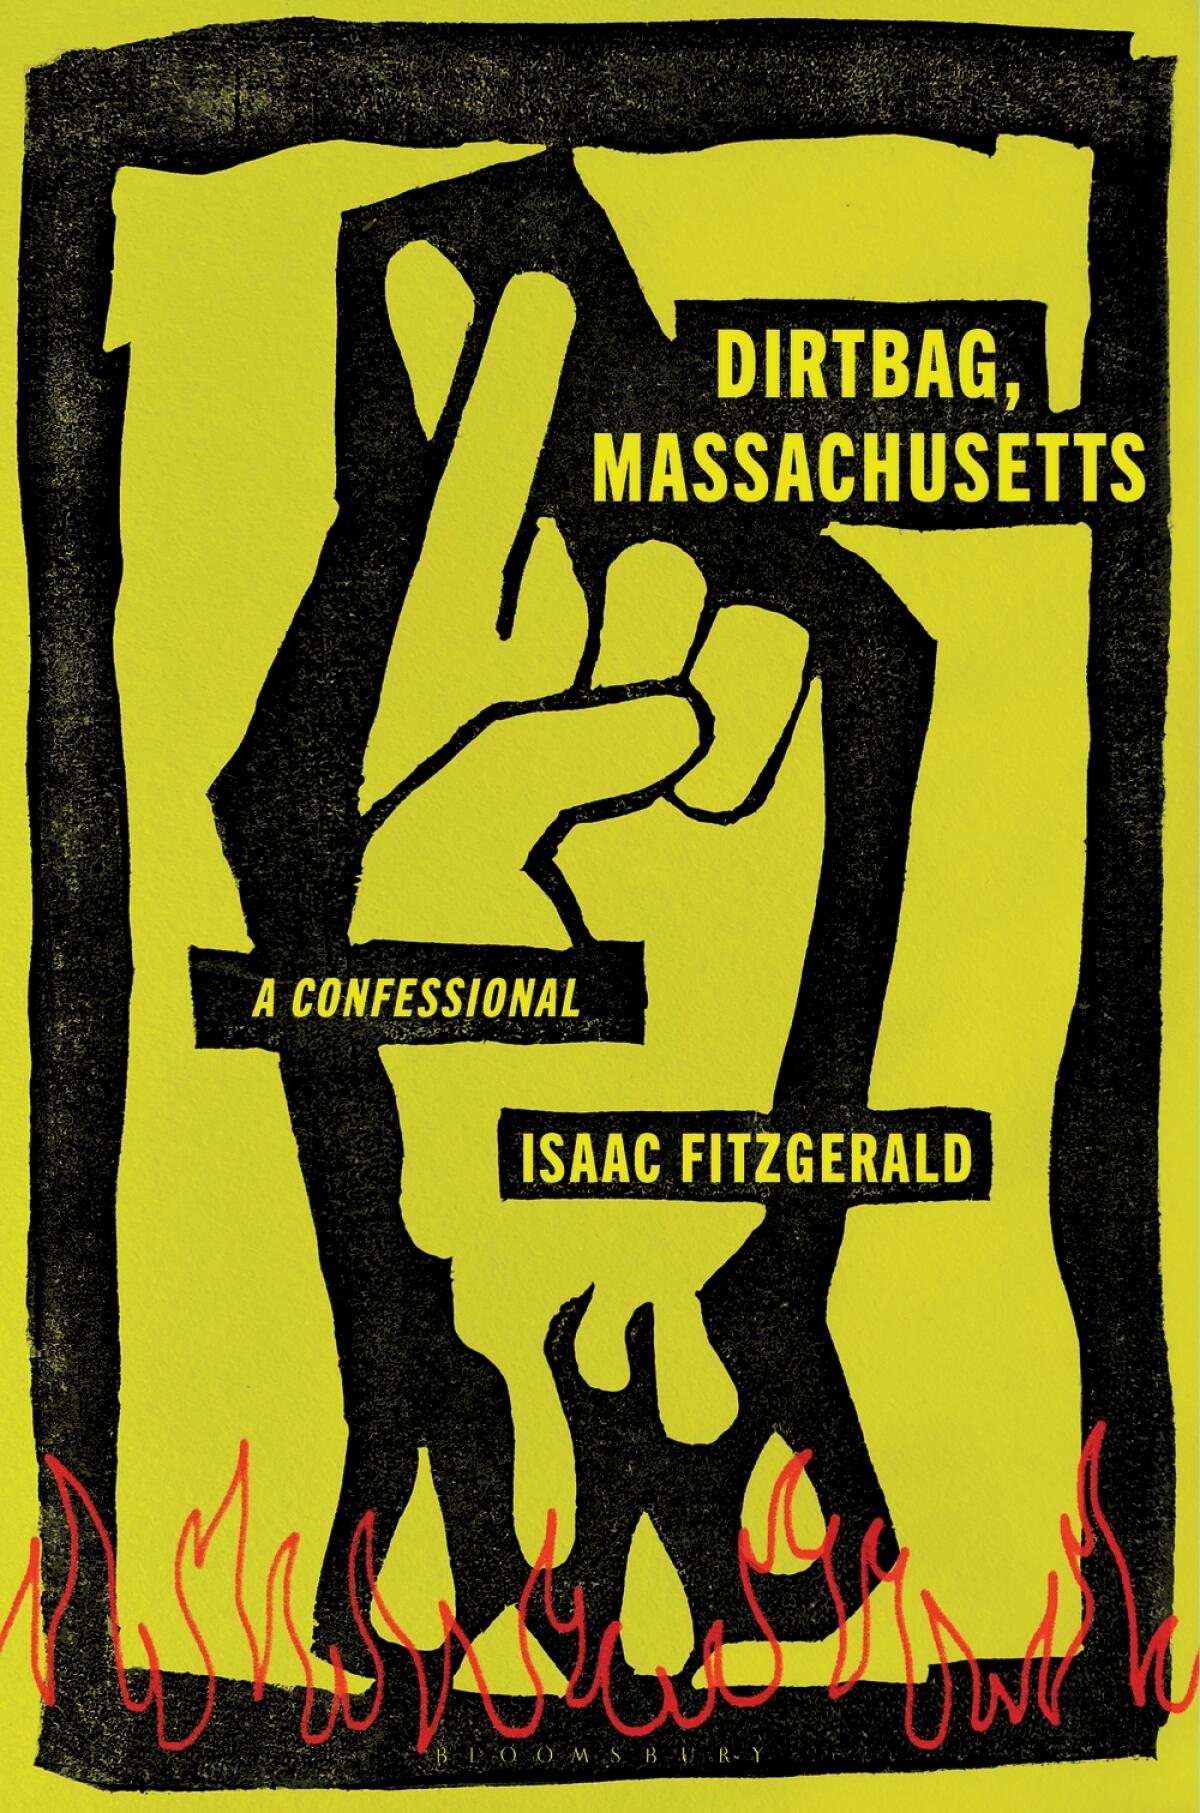 "Dirtbag, Massachusetts: A Confessional" by Isaac Fitzgerald